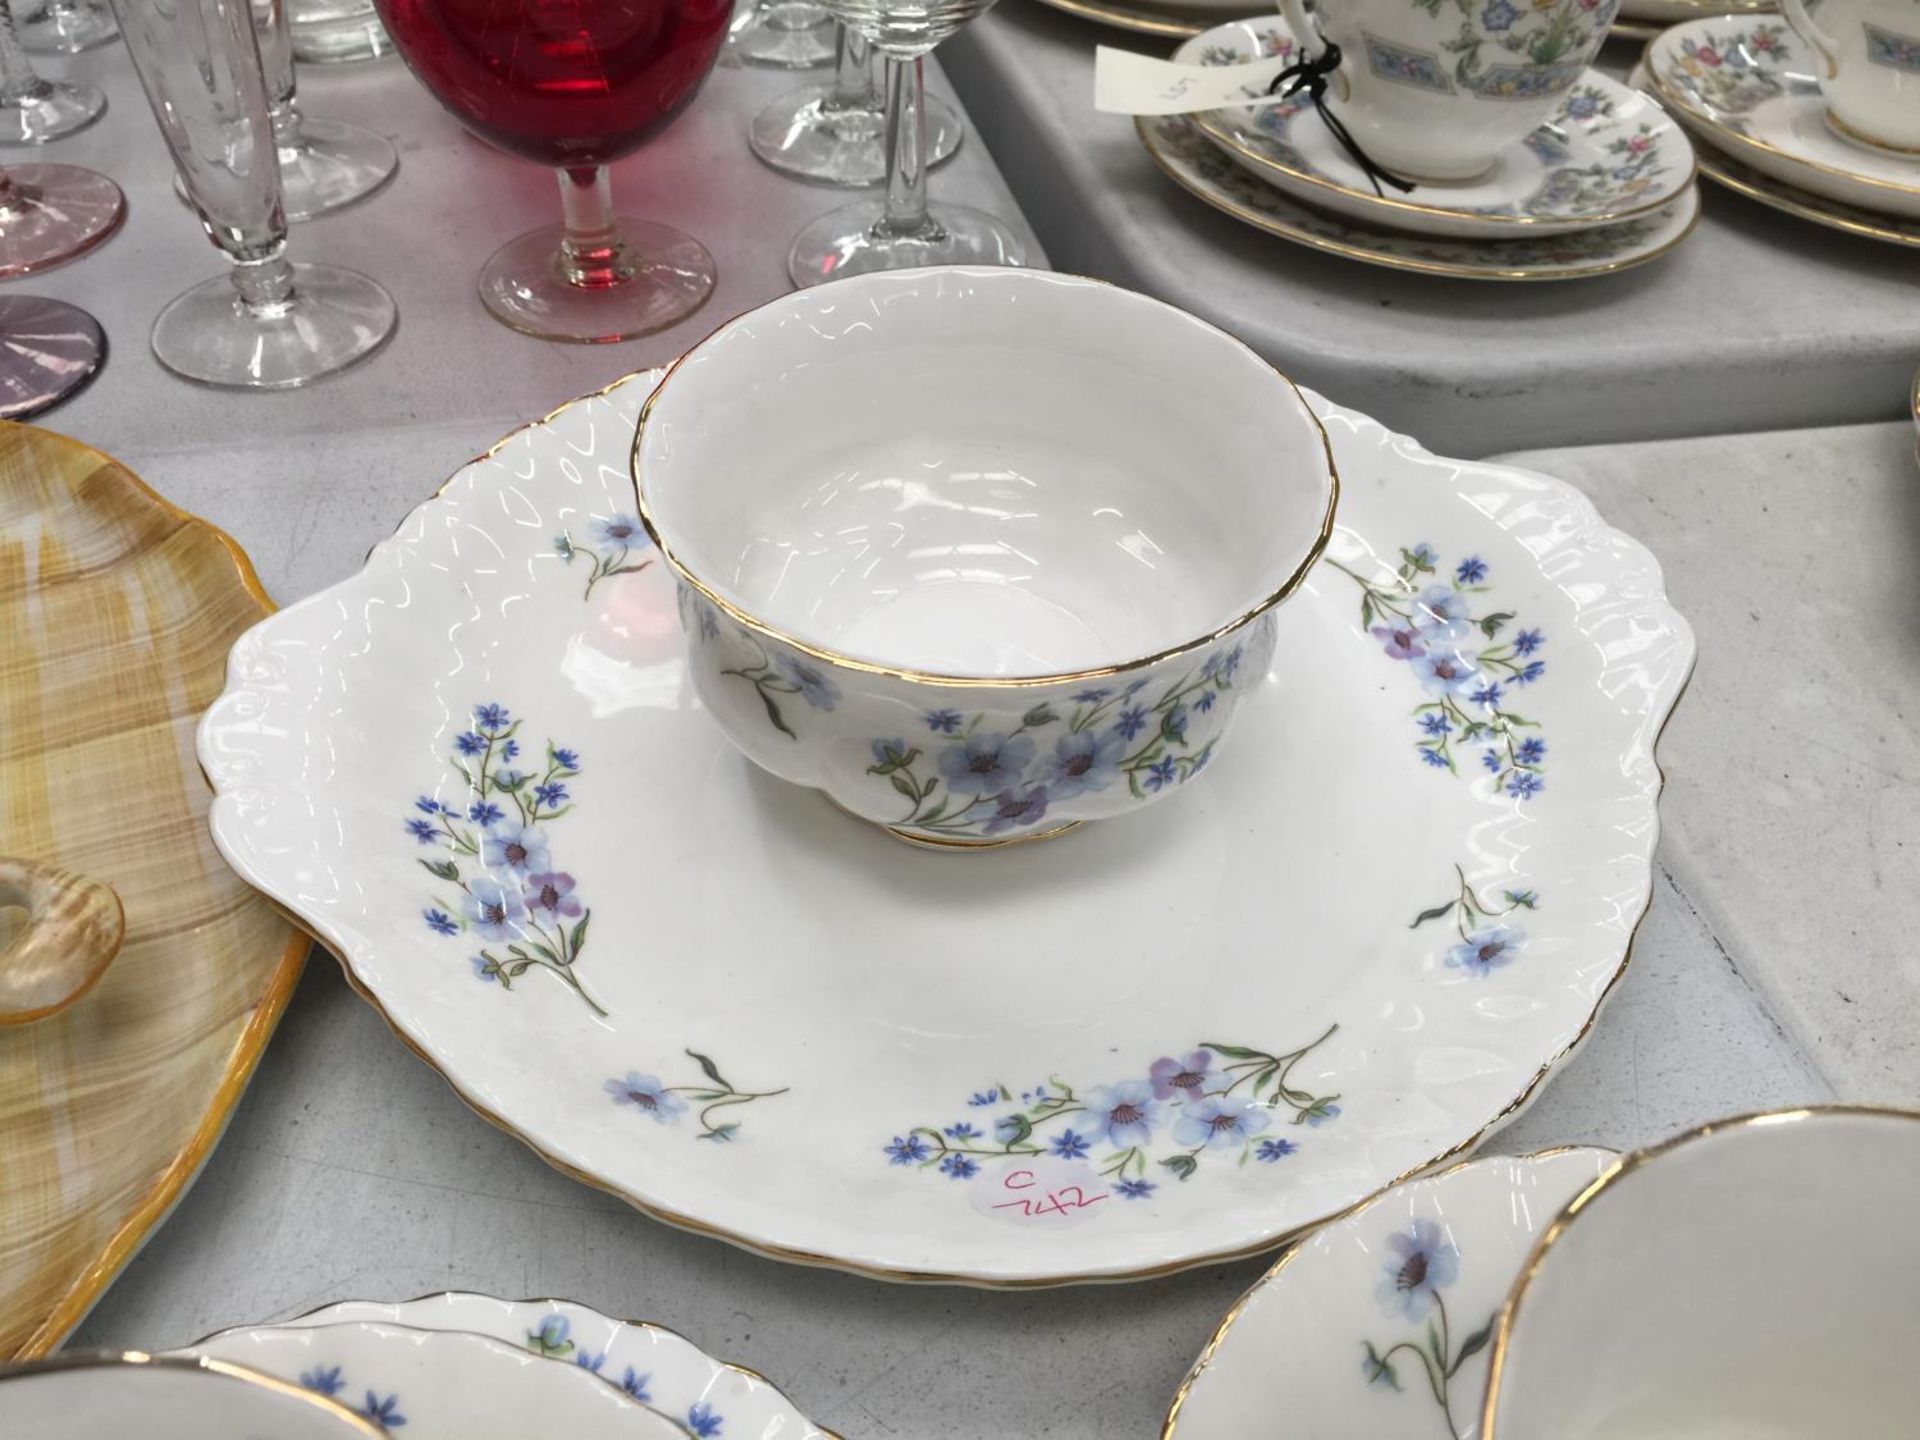 A RICHMOND 'BLUE ROCK' CHINA TEASET TO INCLUDE CUPS, SAUCERS, SIDE PLATES, SANDWICH PLATE CREAM - Image 5 of 6